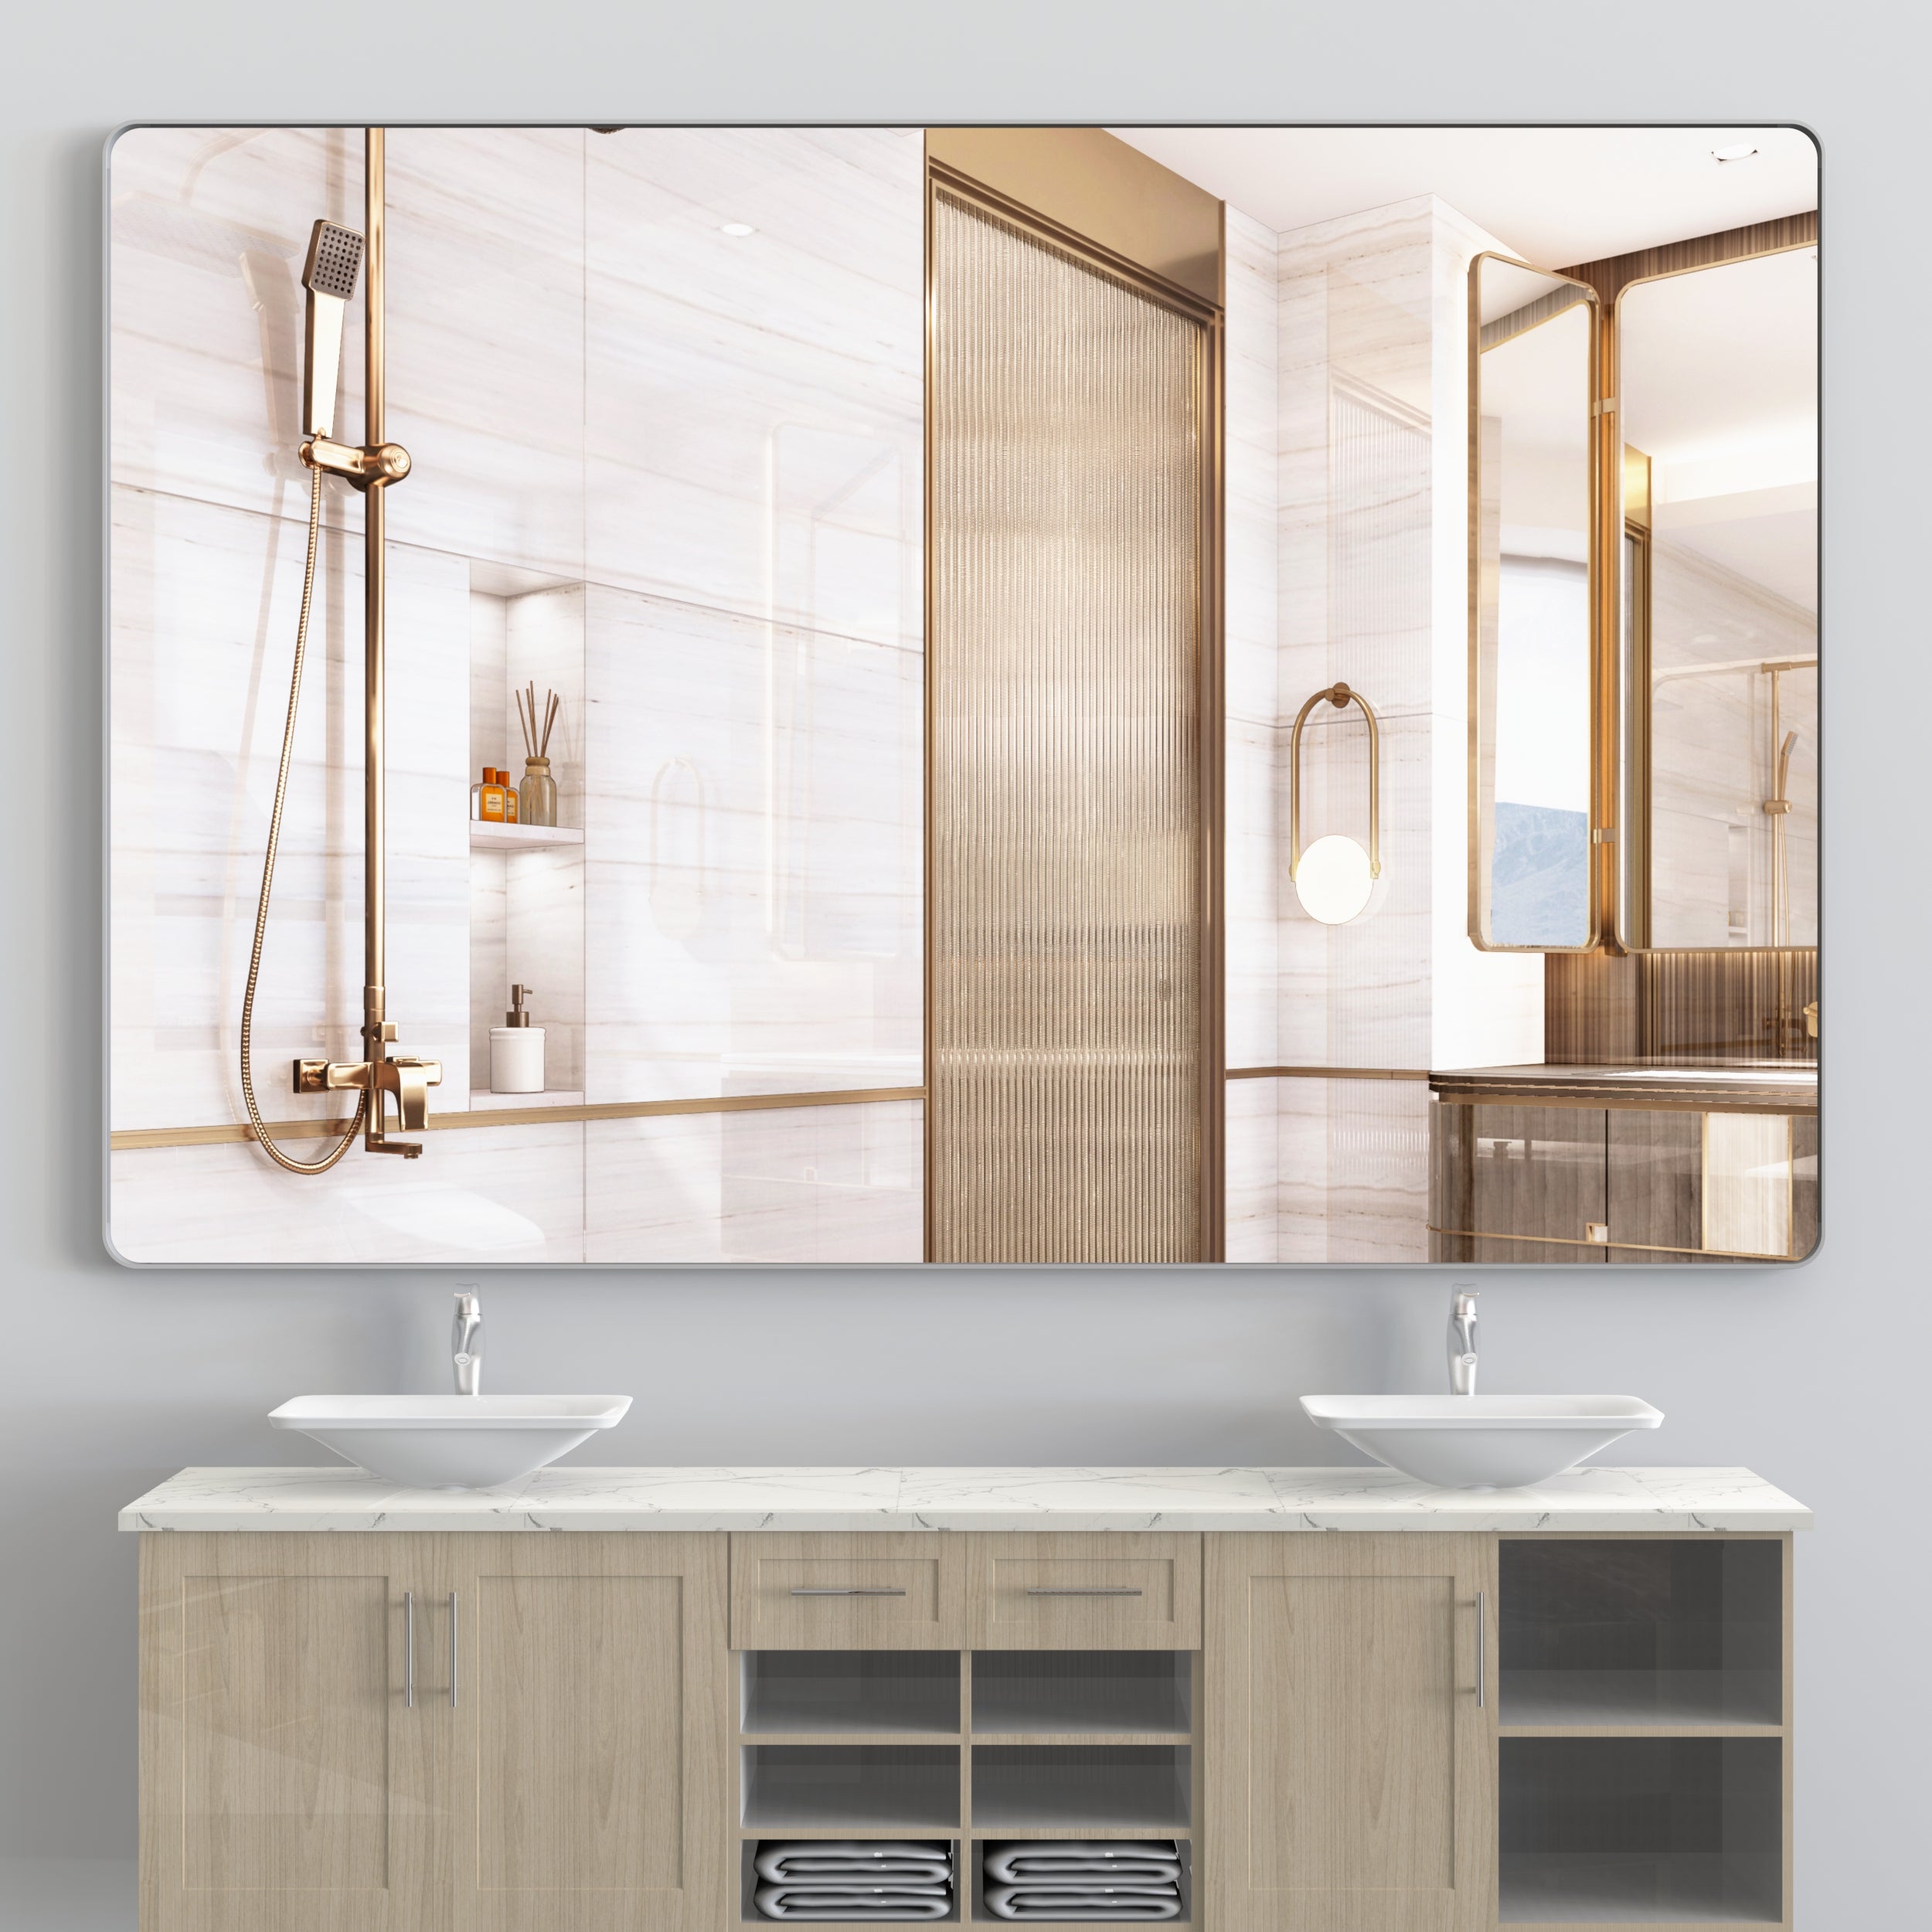 Oversized Bathroom Mirror with Removable Tray Wall Mount Mirror,Vertical Horizontal Hanging Aluminum Framed Wall Mirror Full Length Mirror,Full Body Mirror for Bedroom Living Room,Silver,72x48 Inches